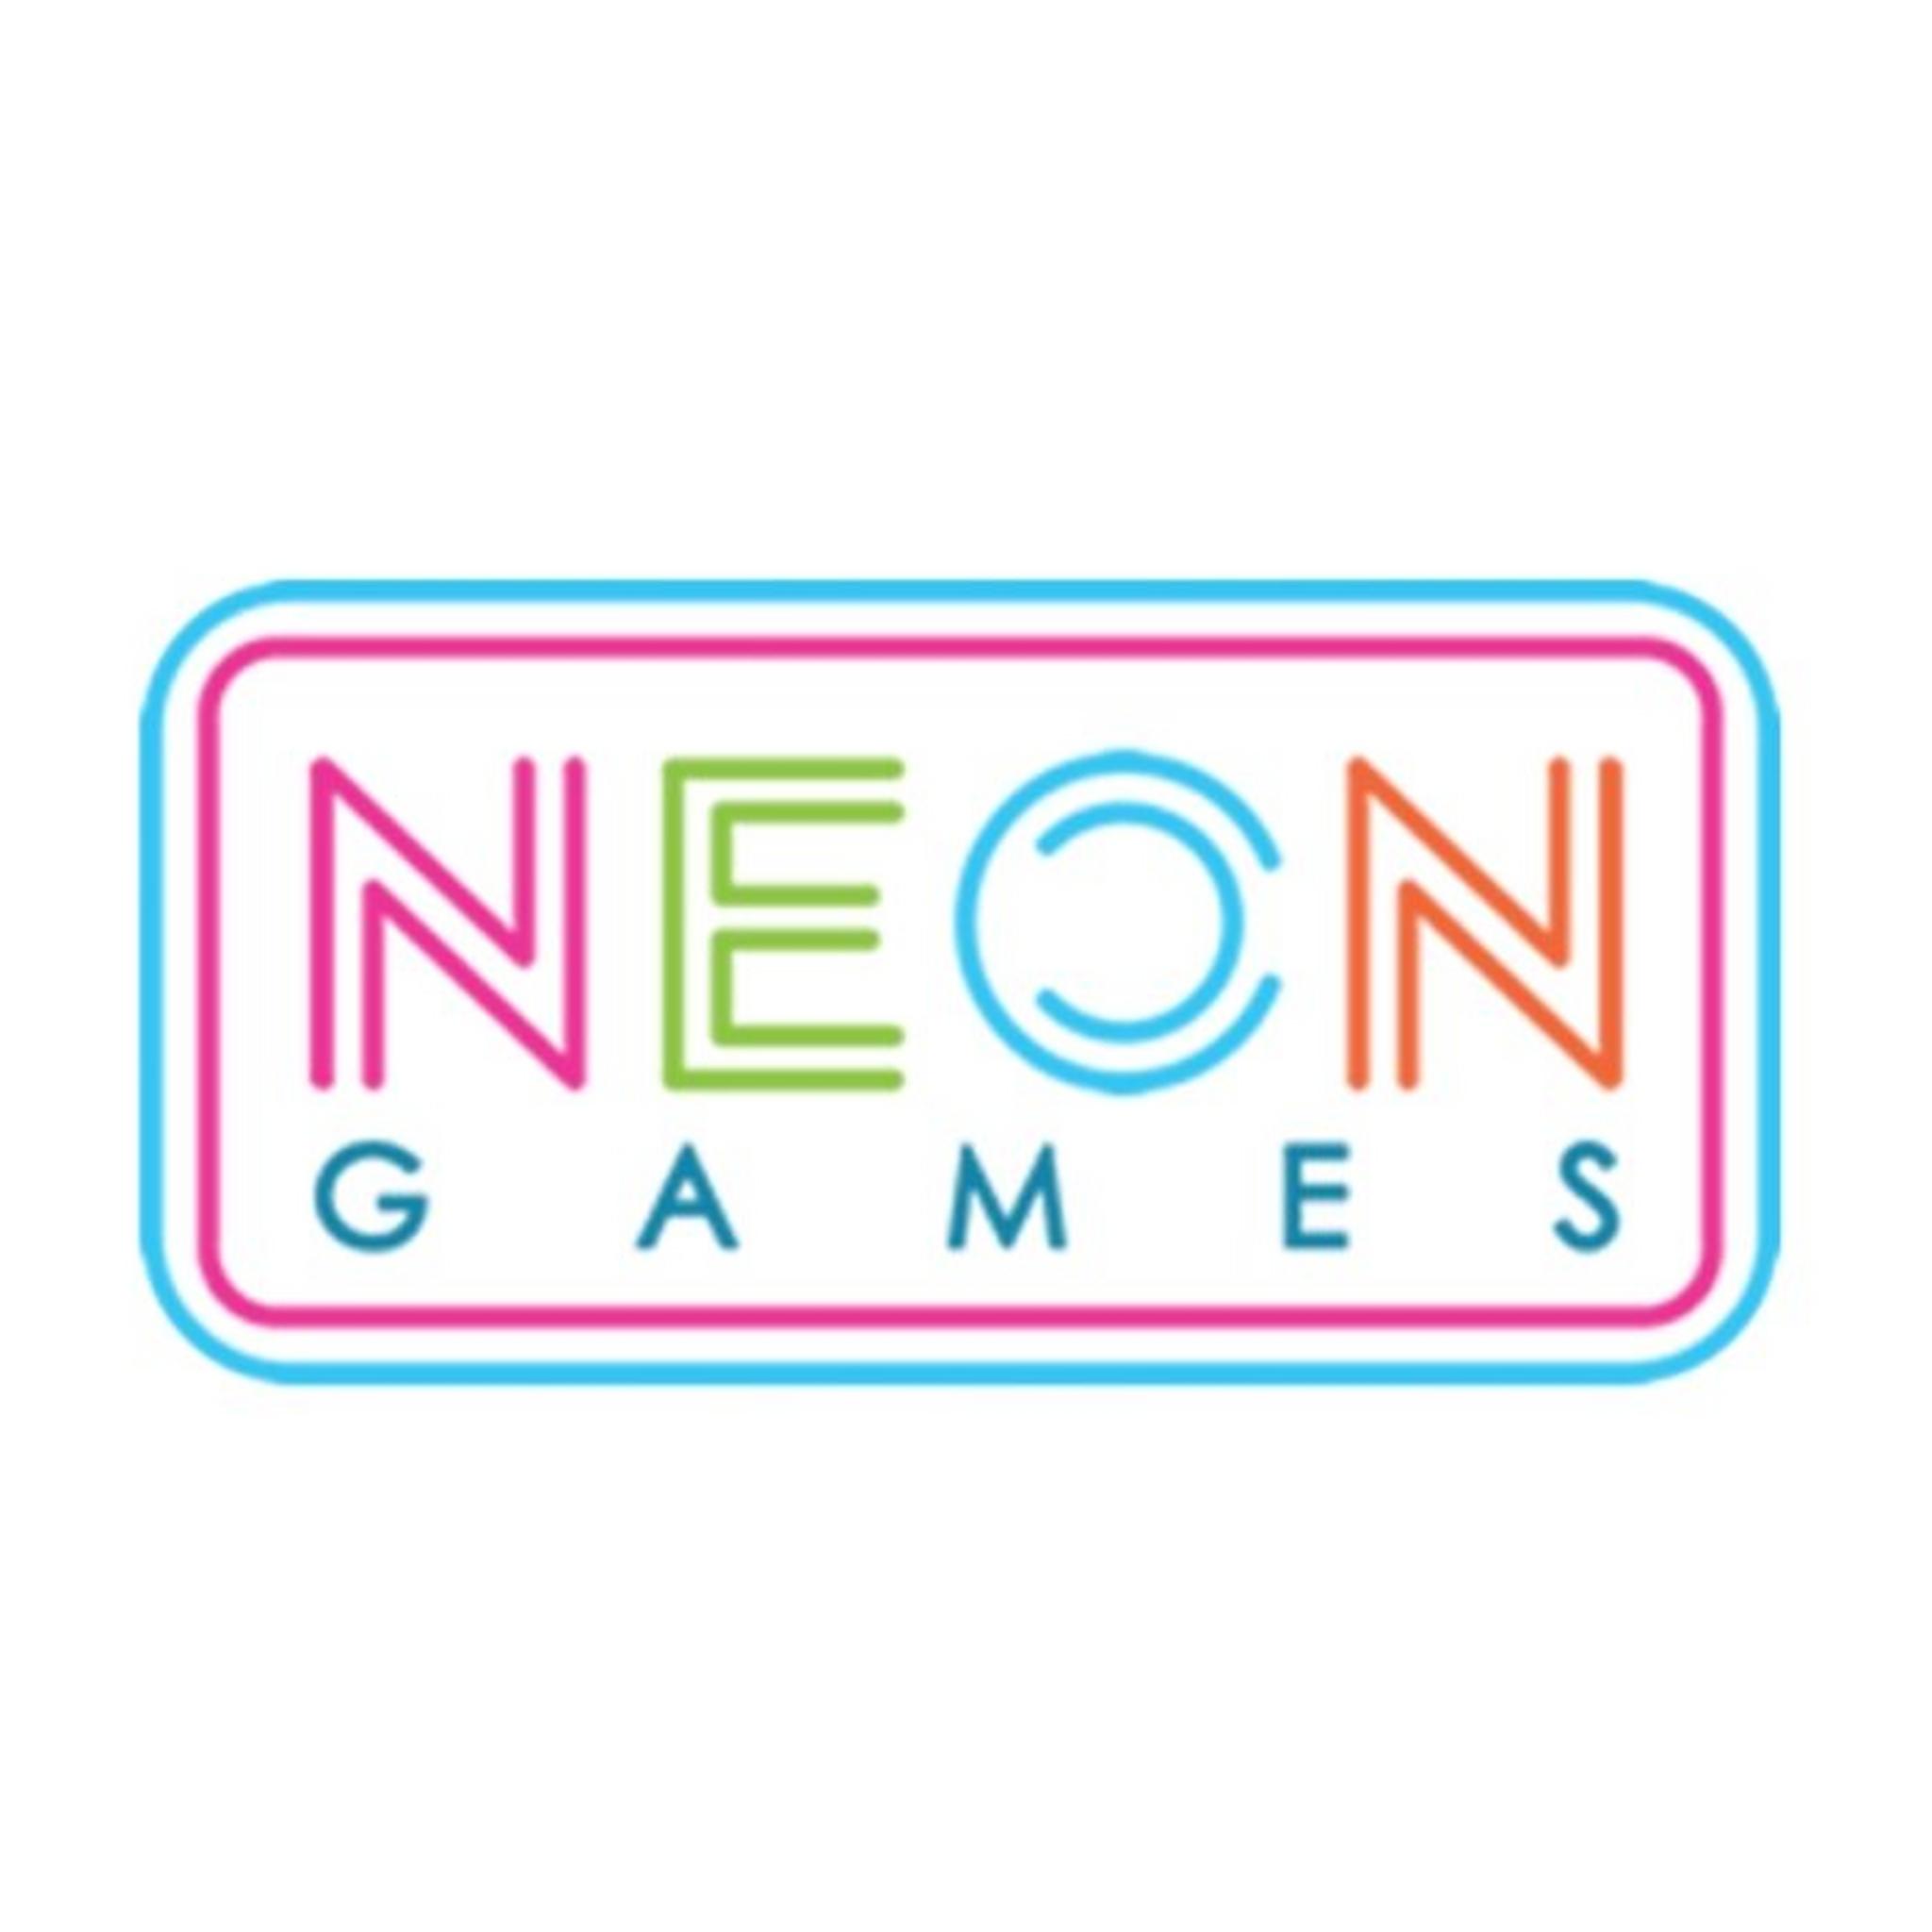 Neoon Games Card - 14000 points